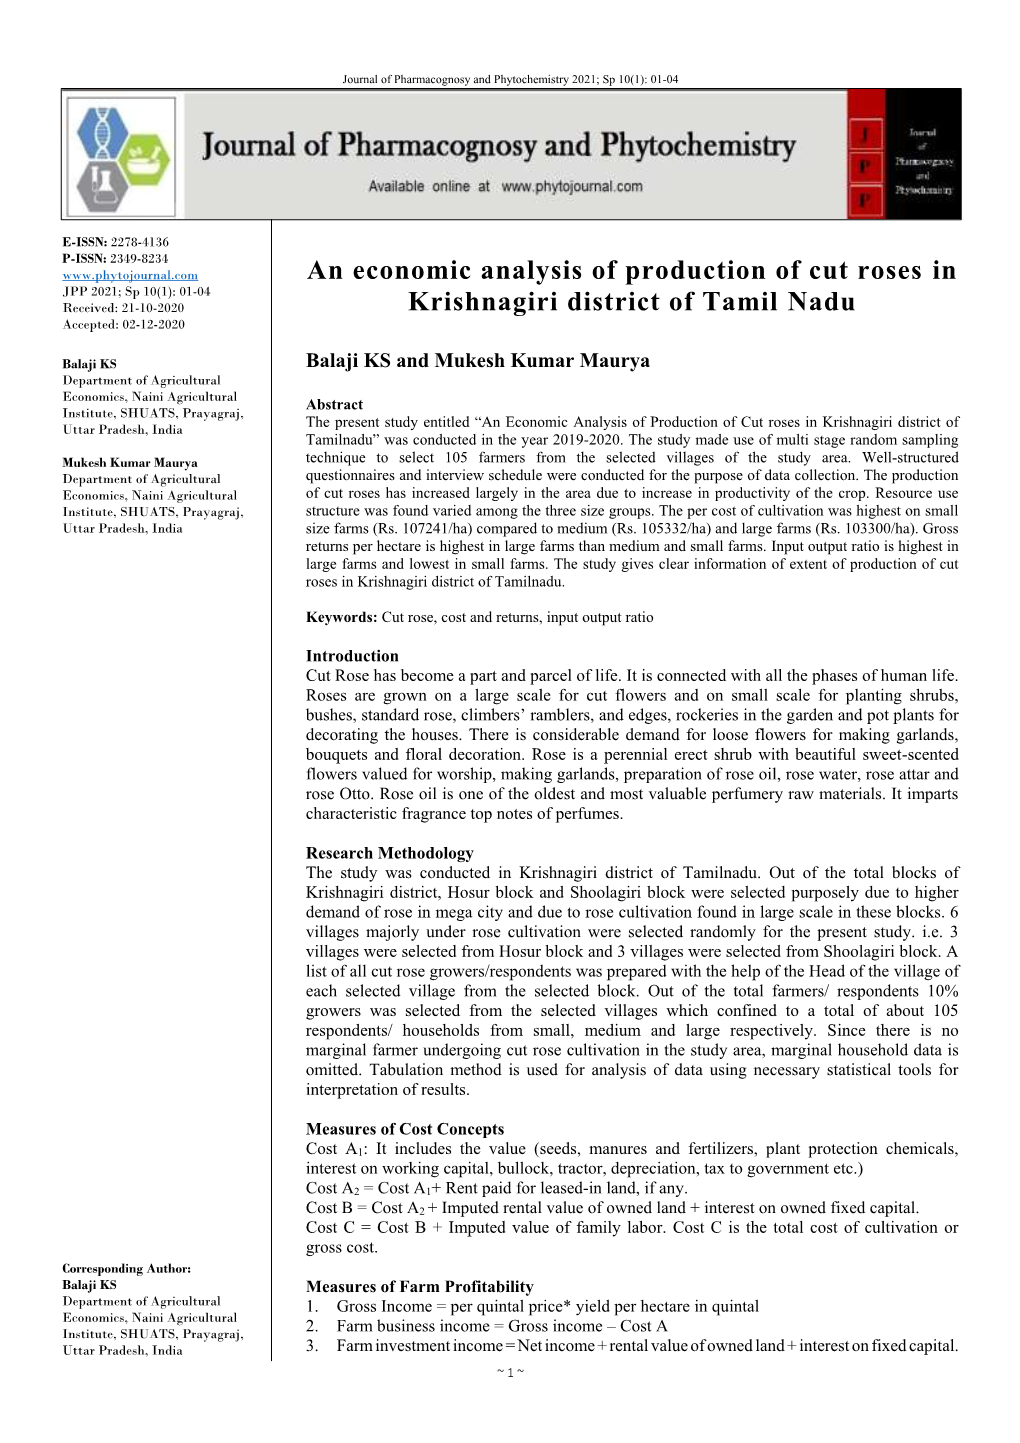 An Economic Analysis of Production of Cut Roses in Krishnagiri District of Uttar Pradesh, India Tamilnadu” Was Conducted in the Year 2019-2020